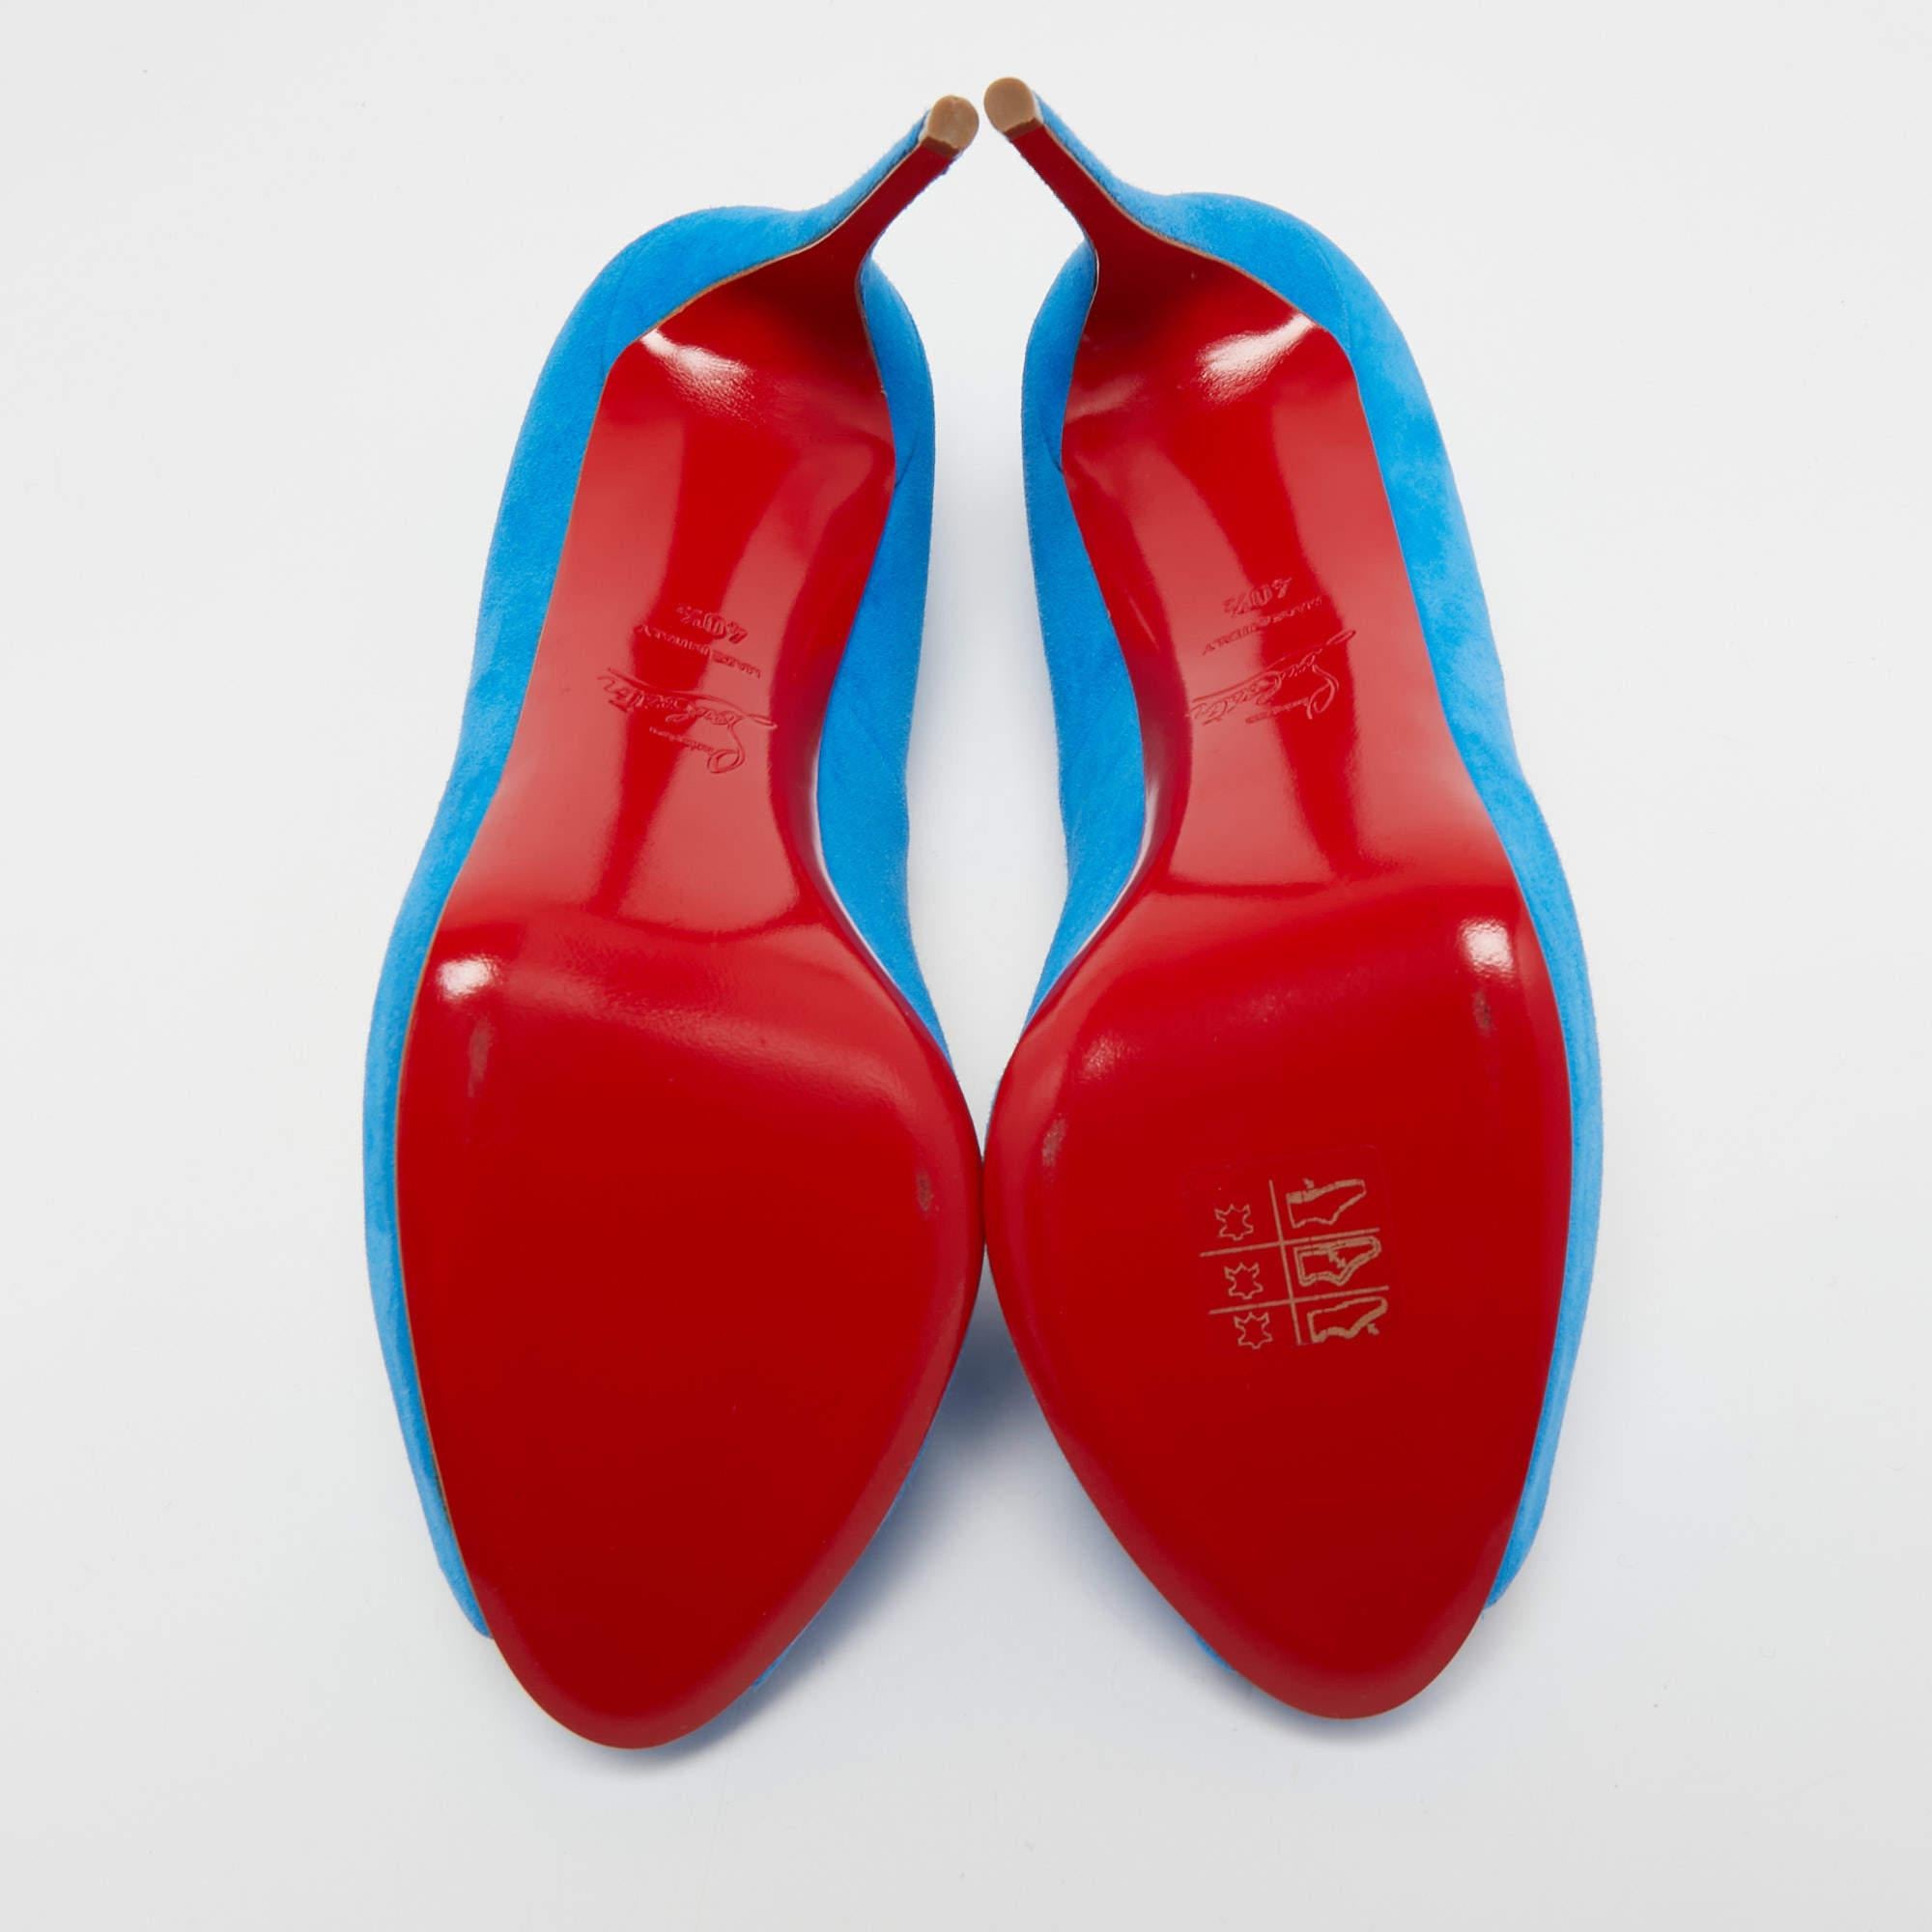 Christian Louboutin Blue Suede New Very Prive Pumps Size 40.5 4